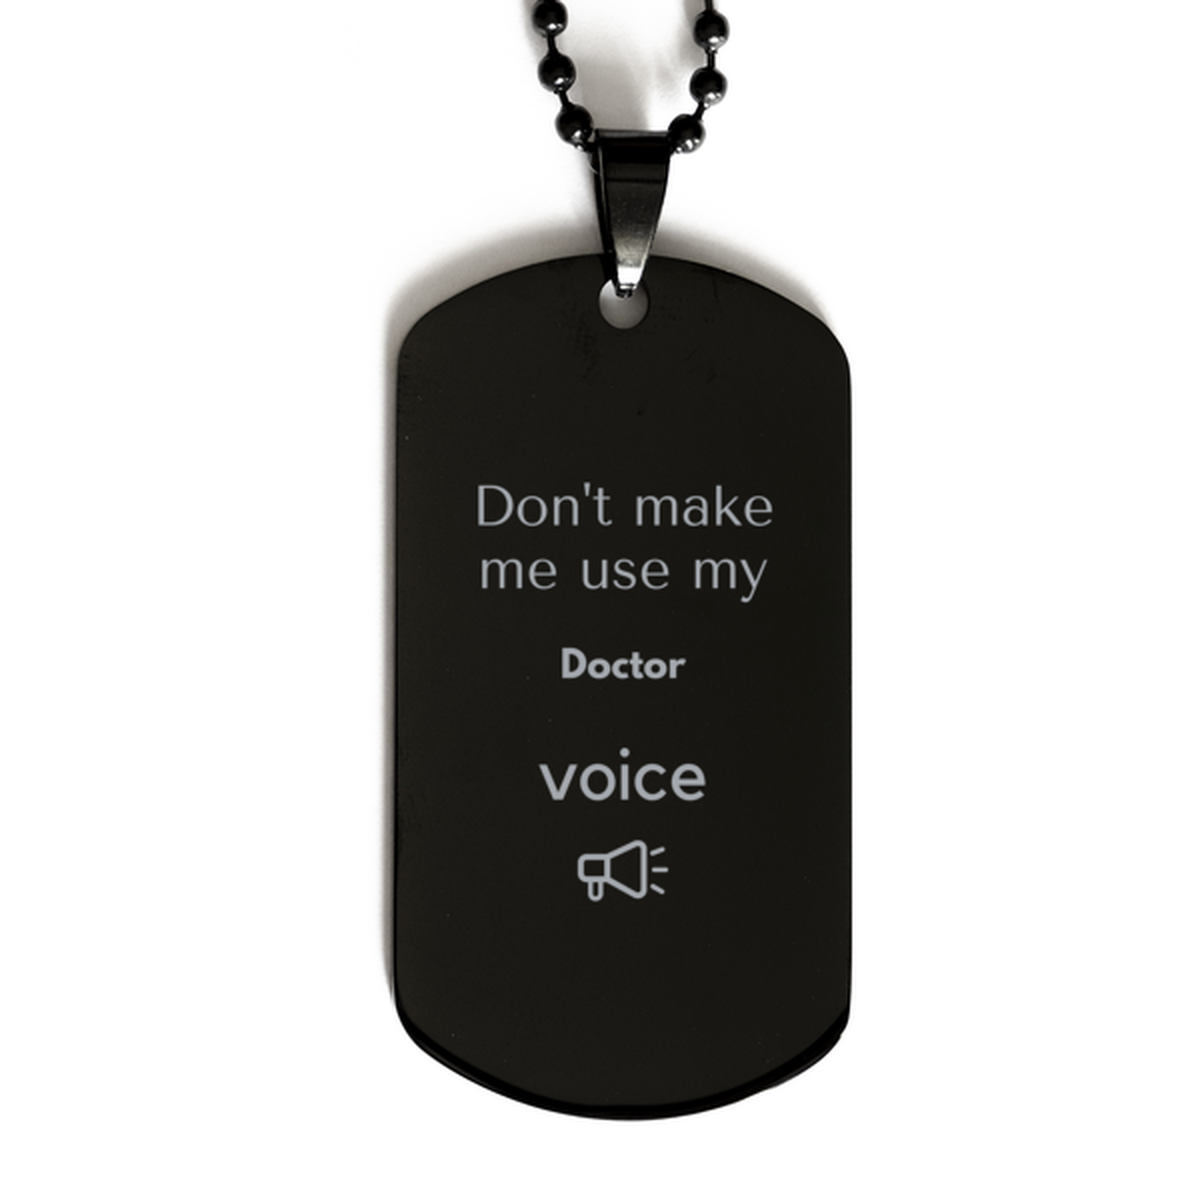 Don't make me use my Doctor voice, Sarcasm Doctor Gifts, Christmas Doctor Black Dog Tag Birthday Unique Gifts For Doctor Coworkers, Men, Women, Colleague, Friends